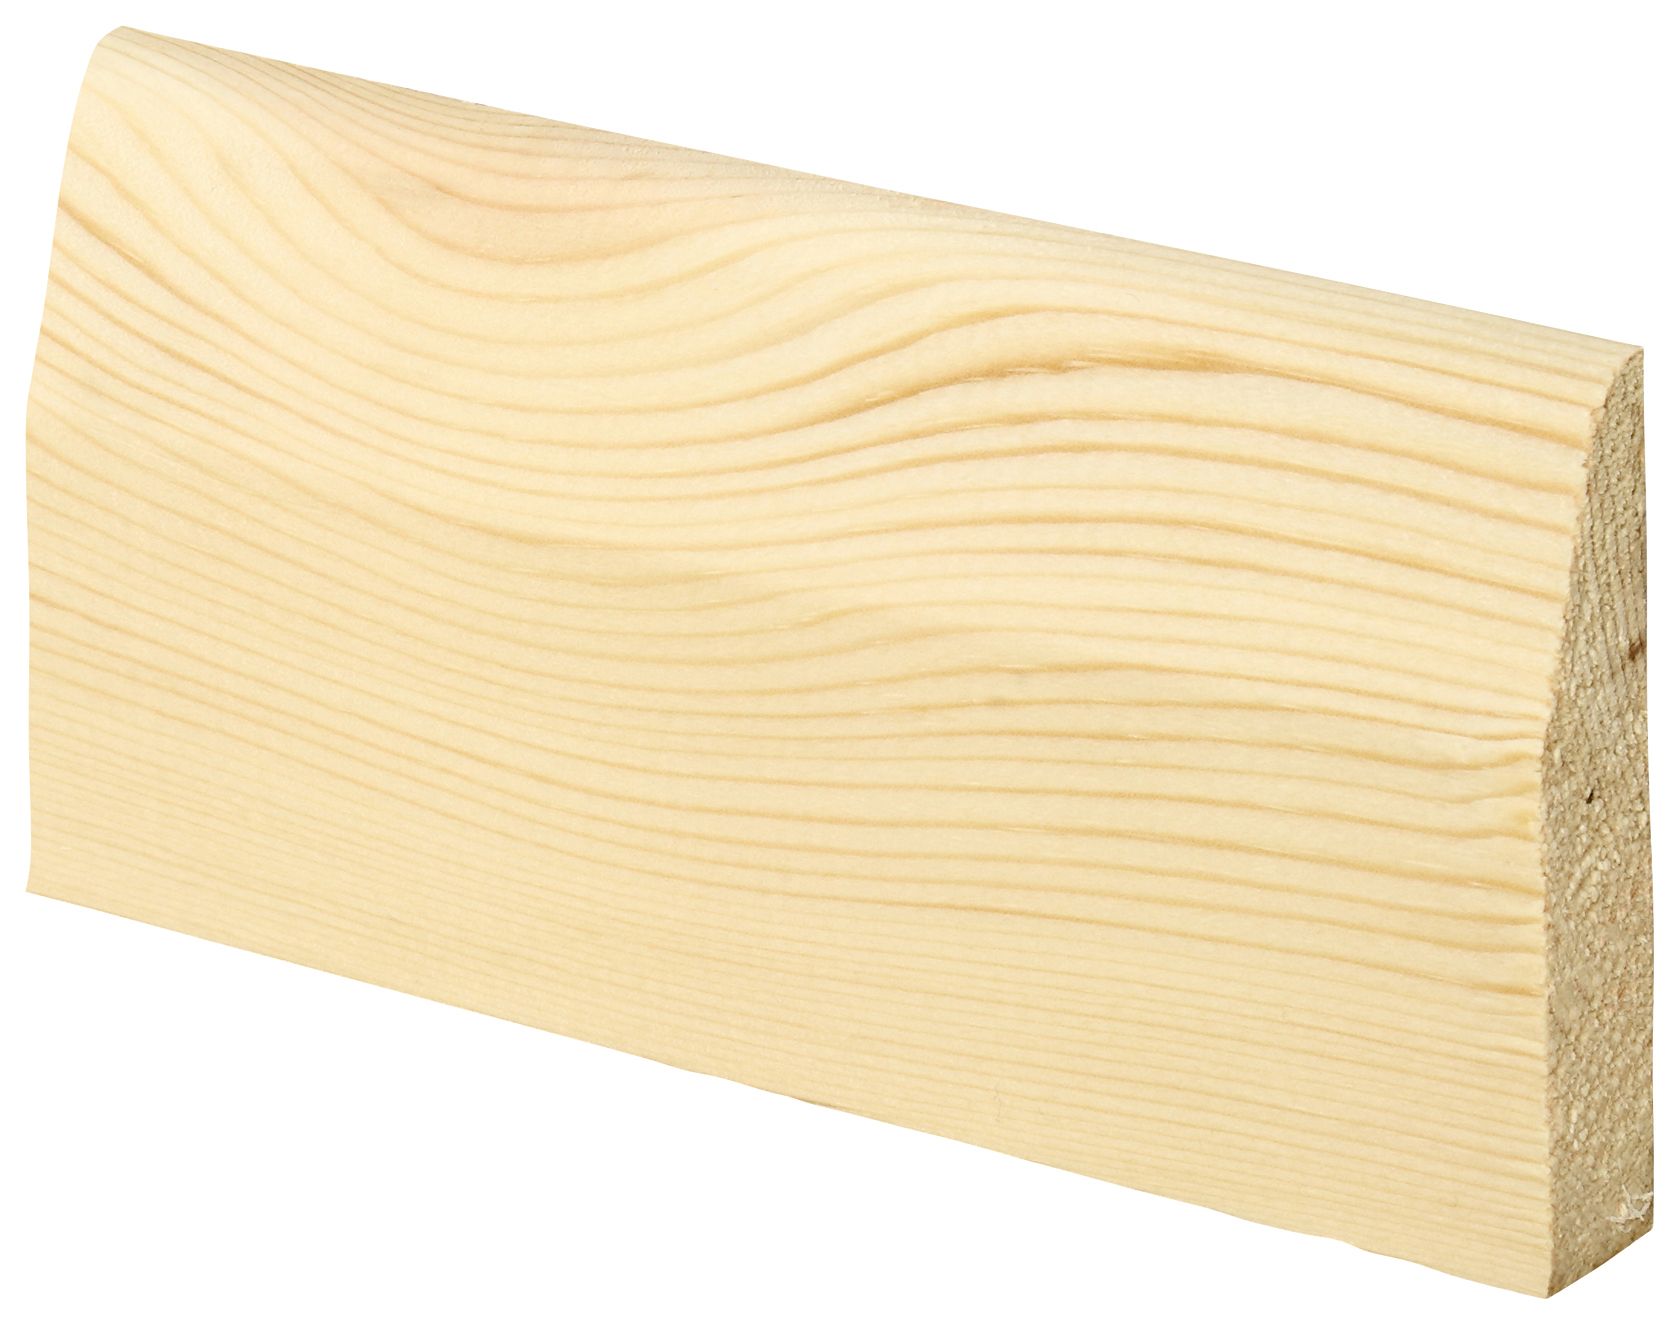 Image of Wickes Chamfered Pine Architrave 19mm x 69mm x 2100mm